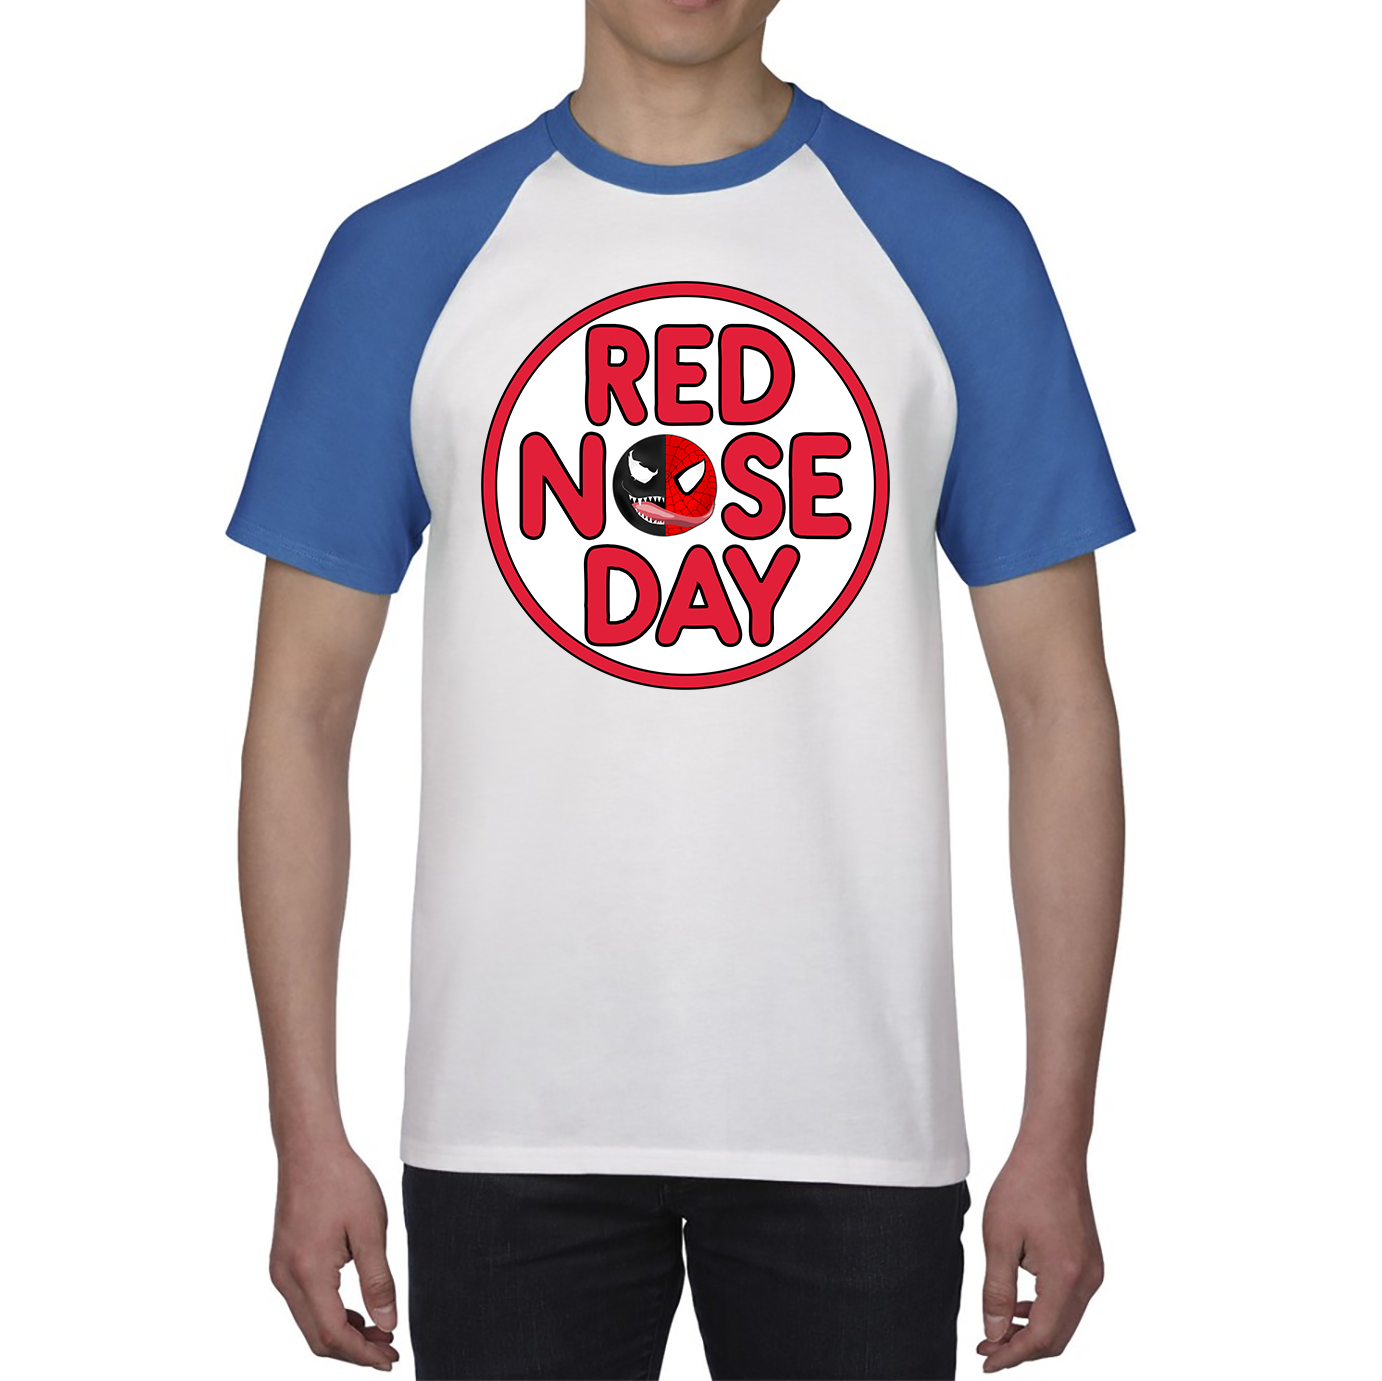 Marvel Venom Spiderman Red Nose Day Baseball T Shirt. 50% Goes To Charity